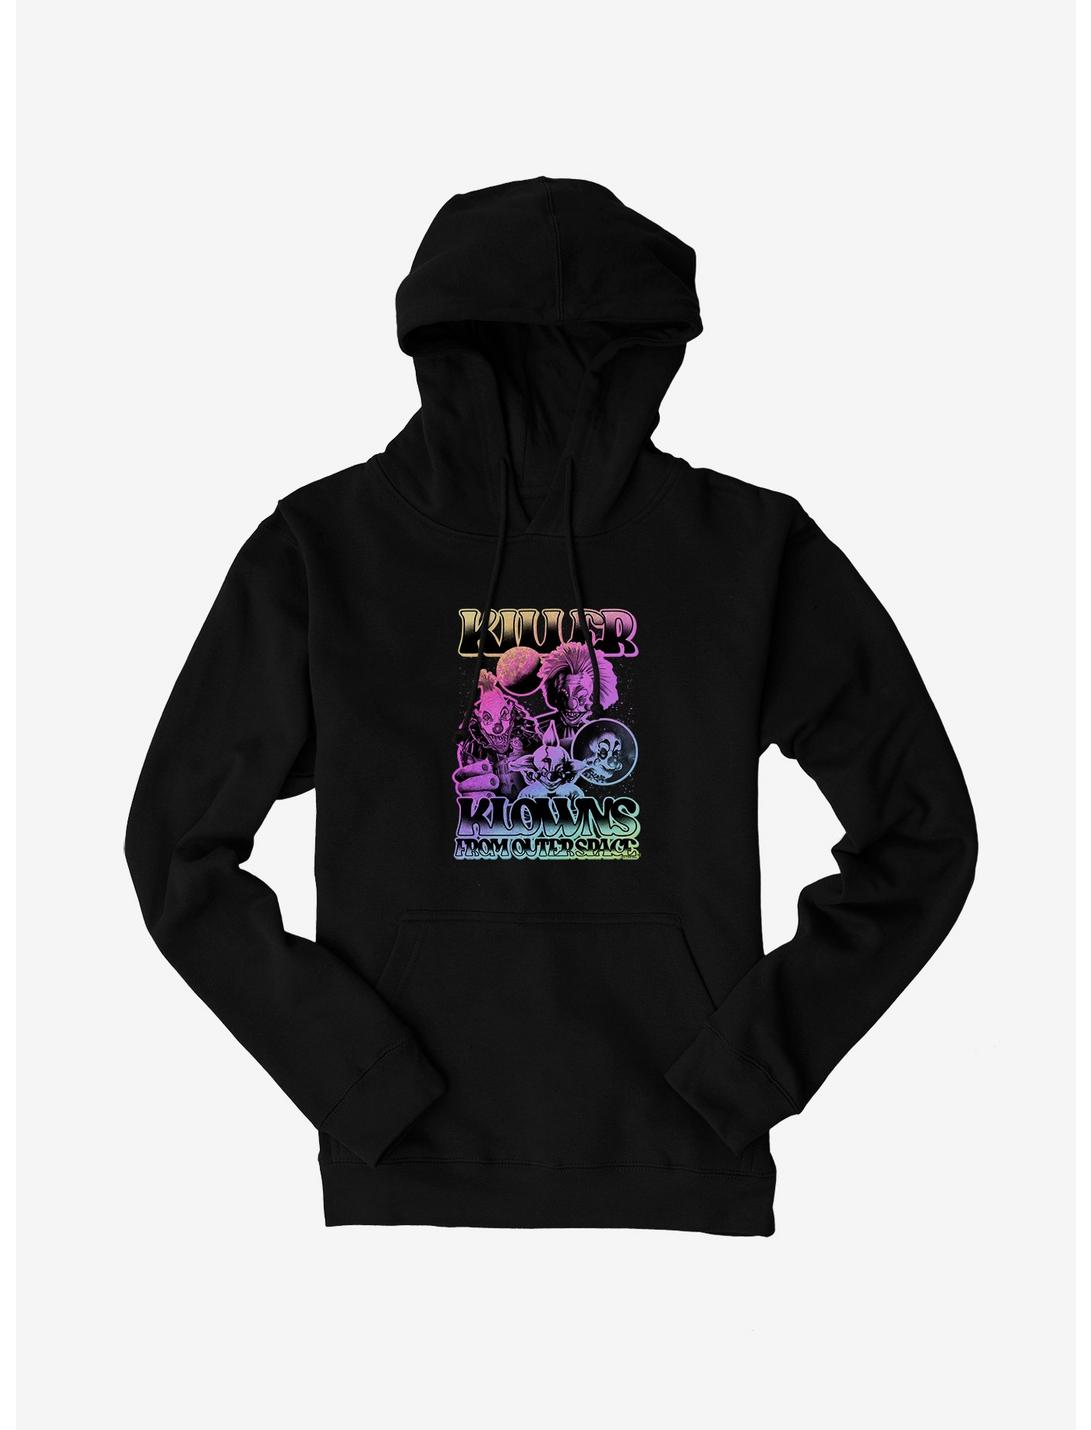 Killer Klowns From Outer Space Gradient Group Hoodie, BLACK, hi-res